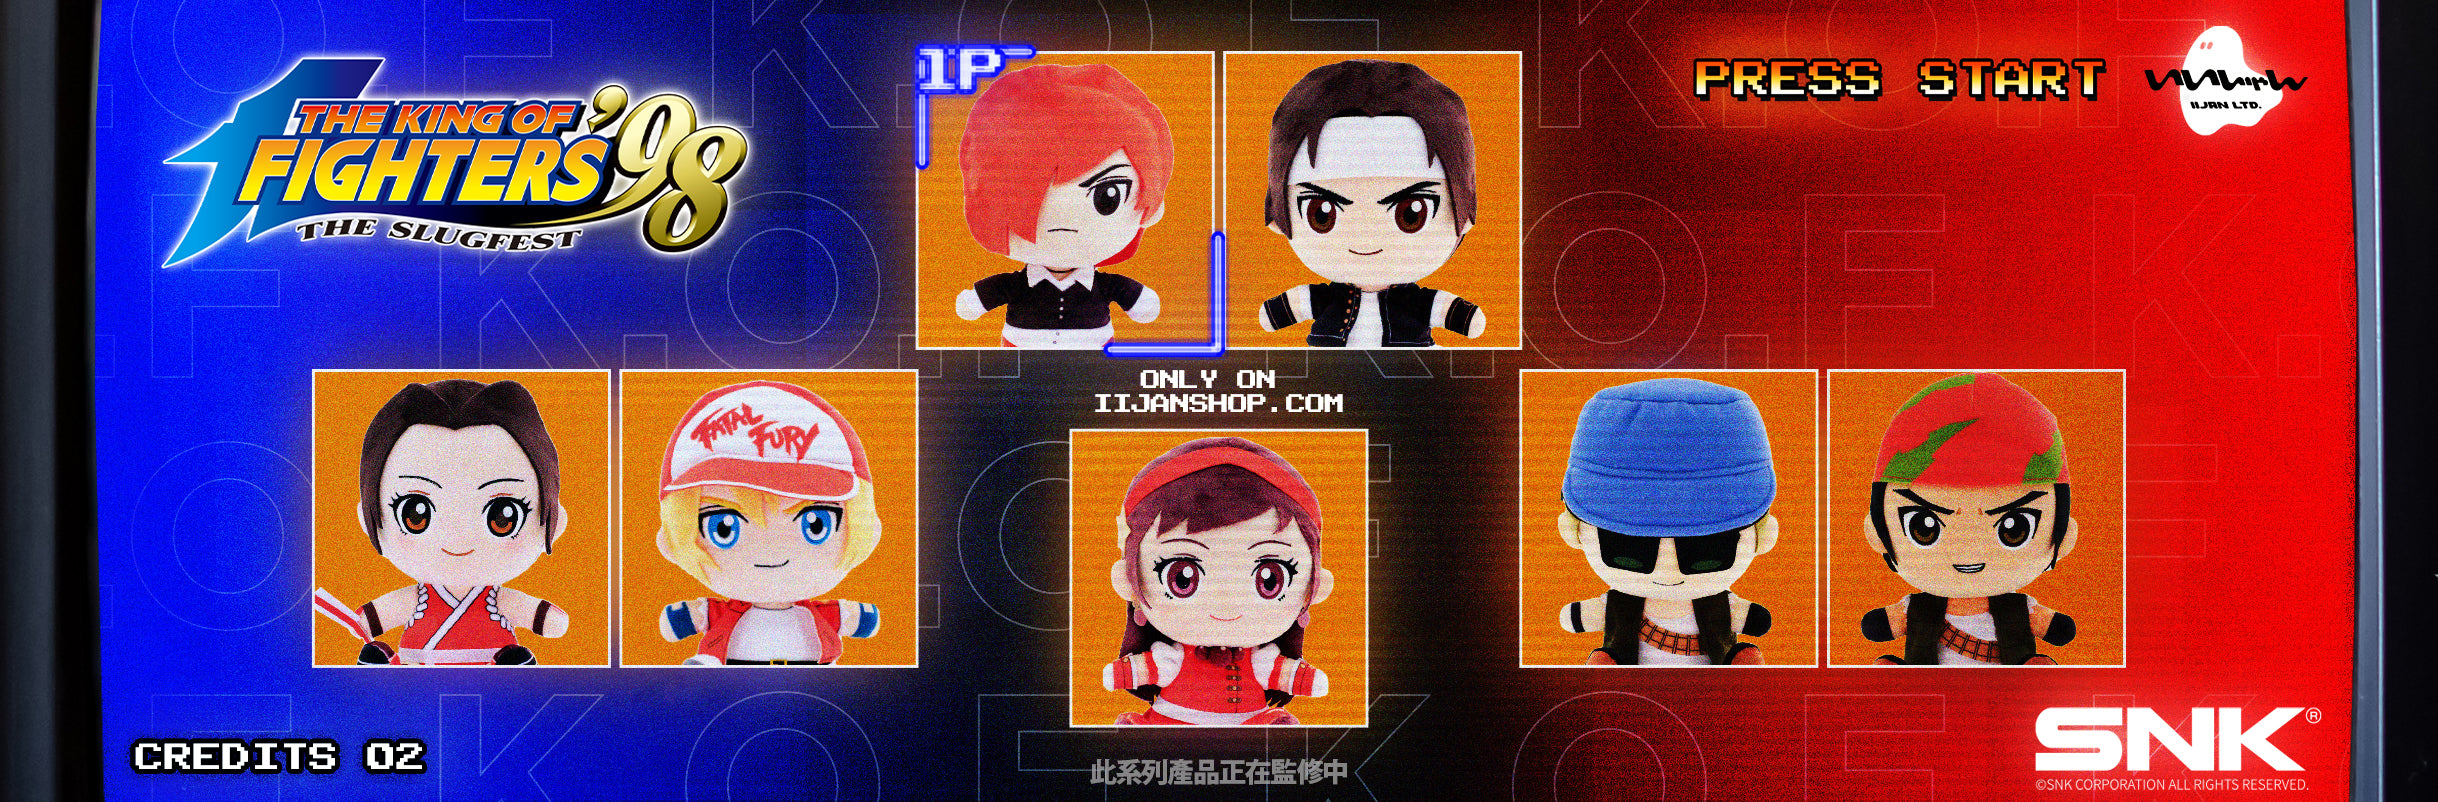 The King of Fighters '98 (KOF'98)